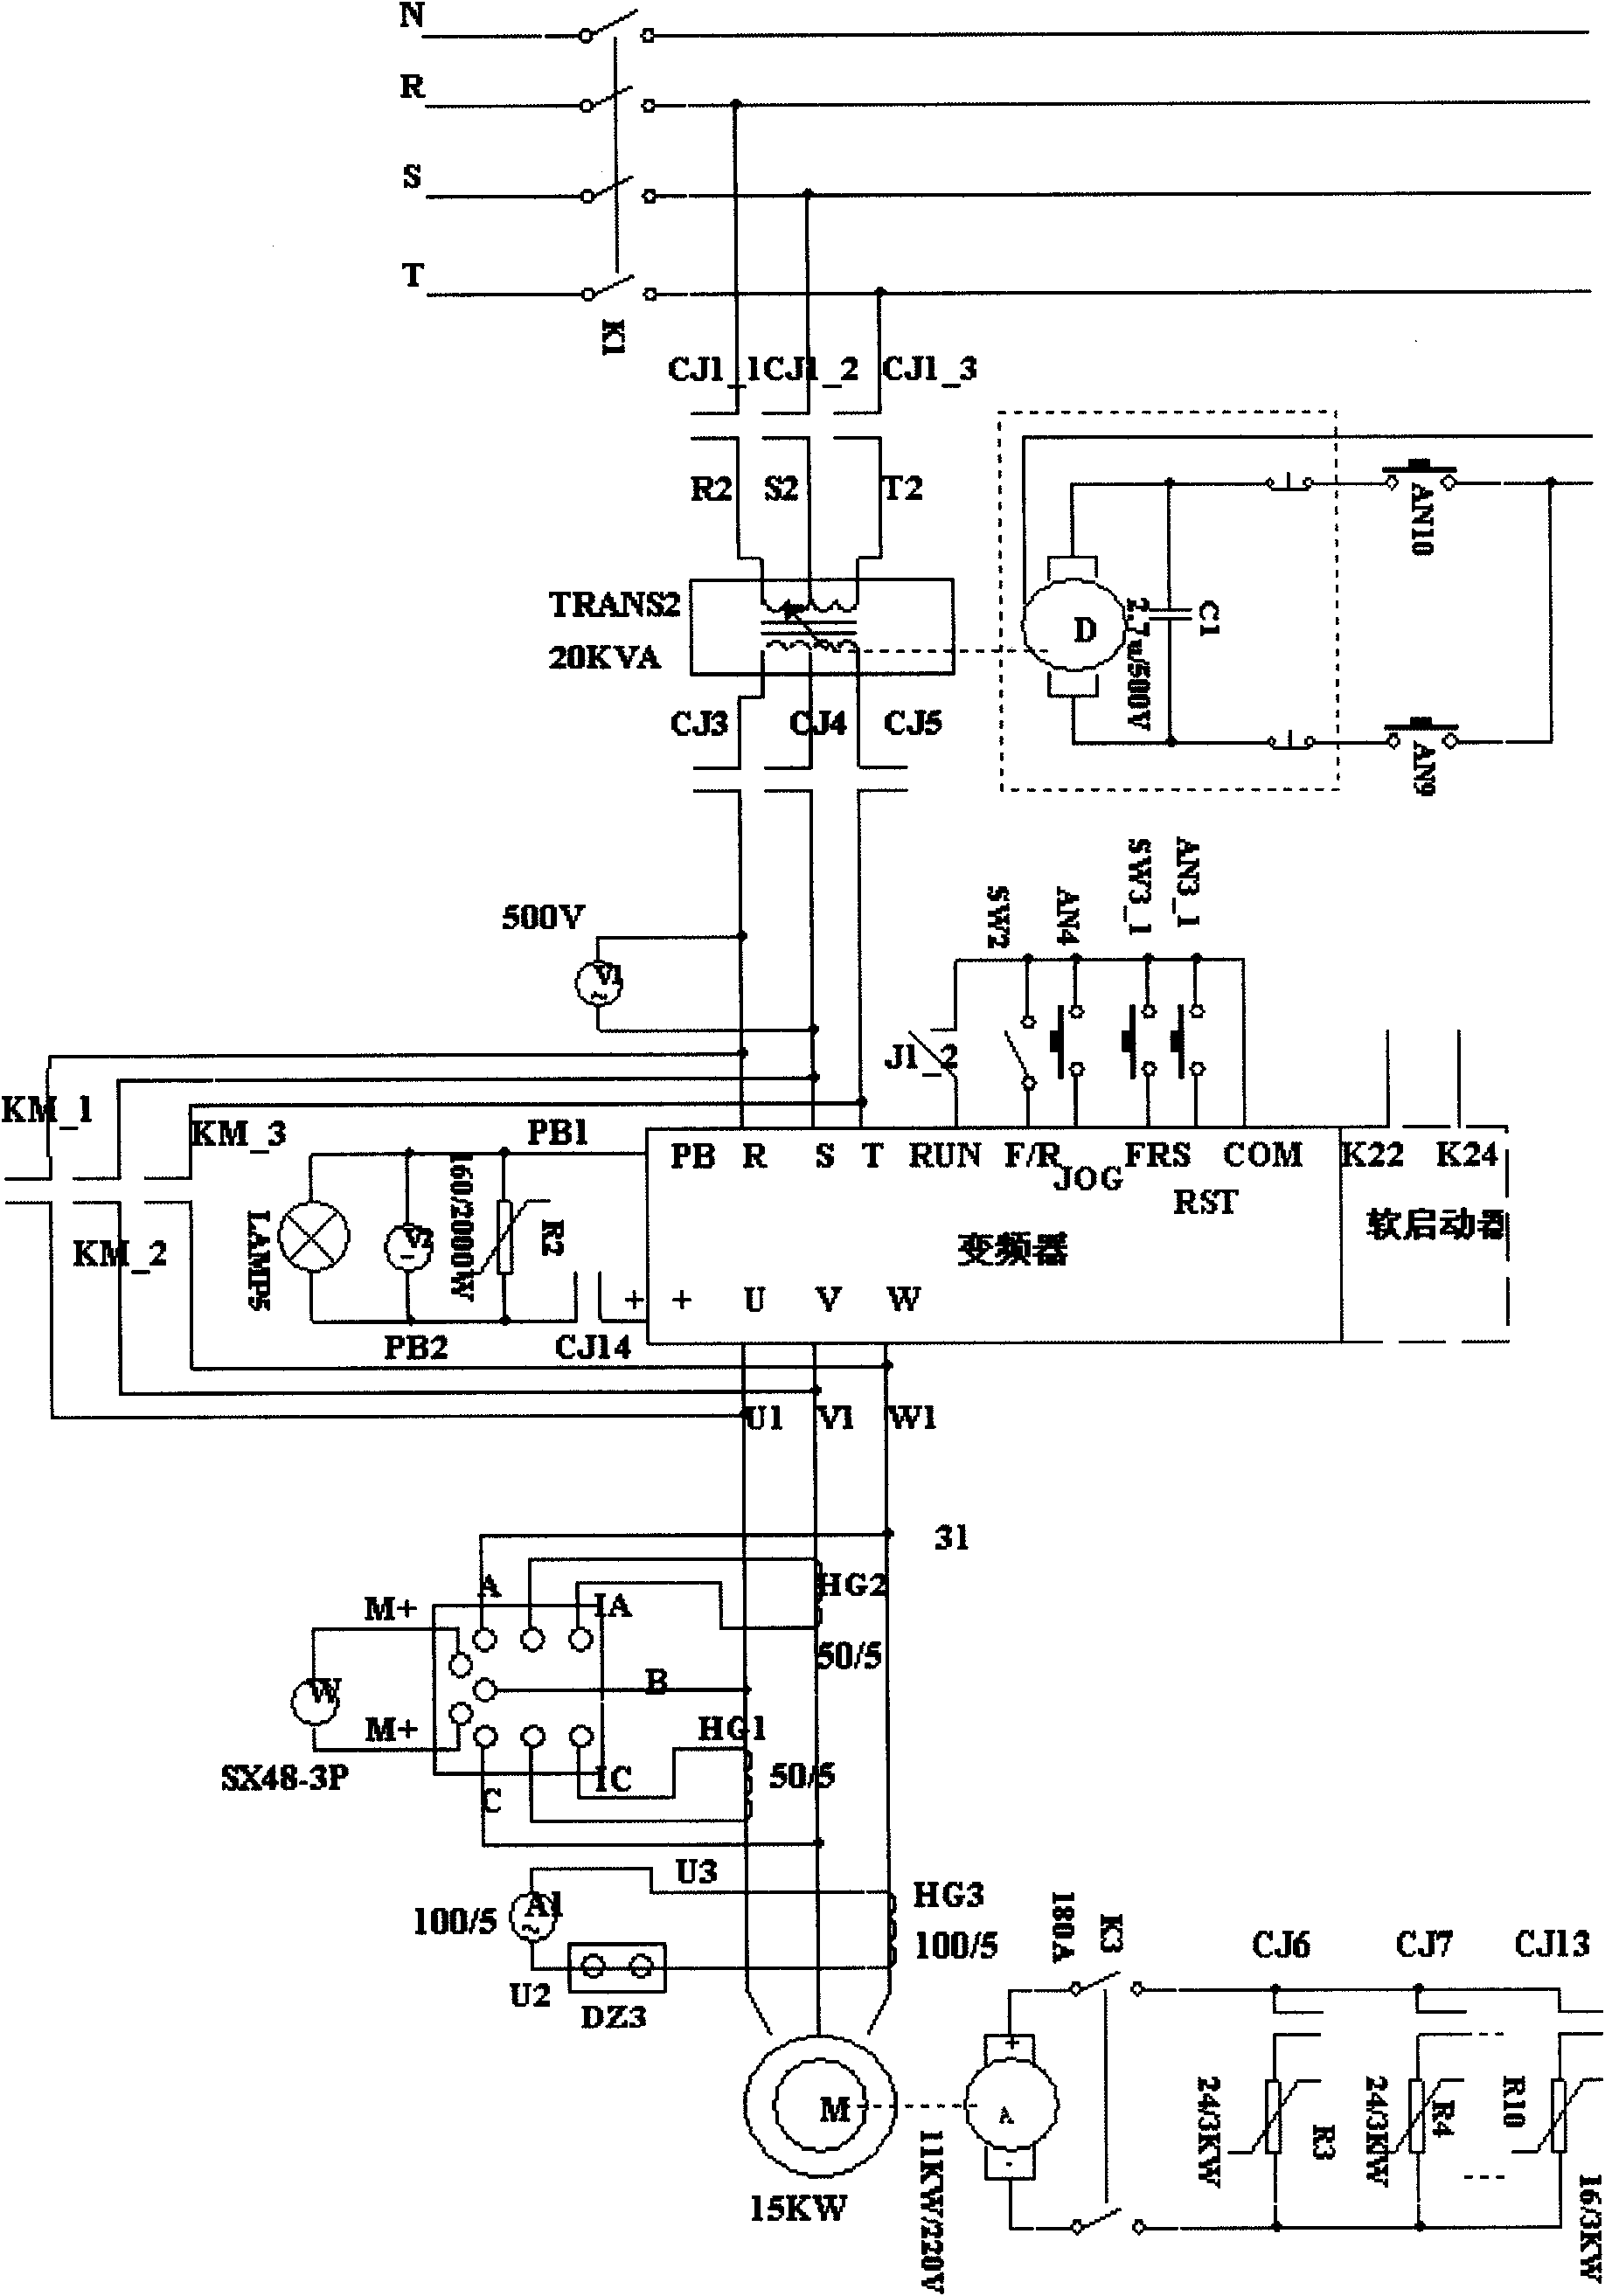 Frequency converter and soft starter comprehensive experimental device